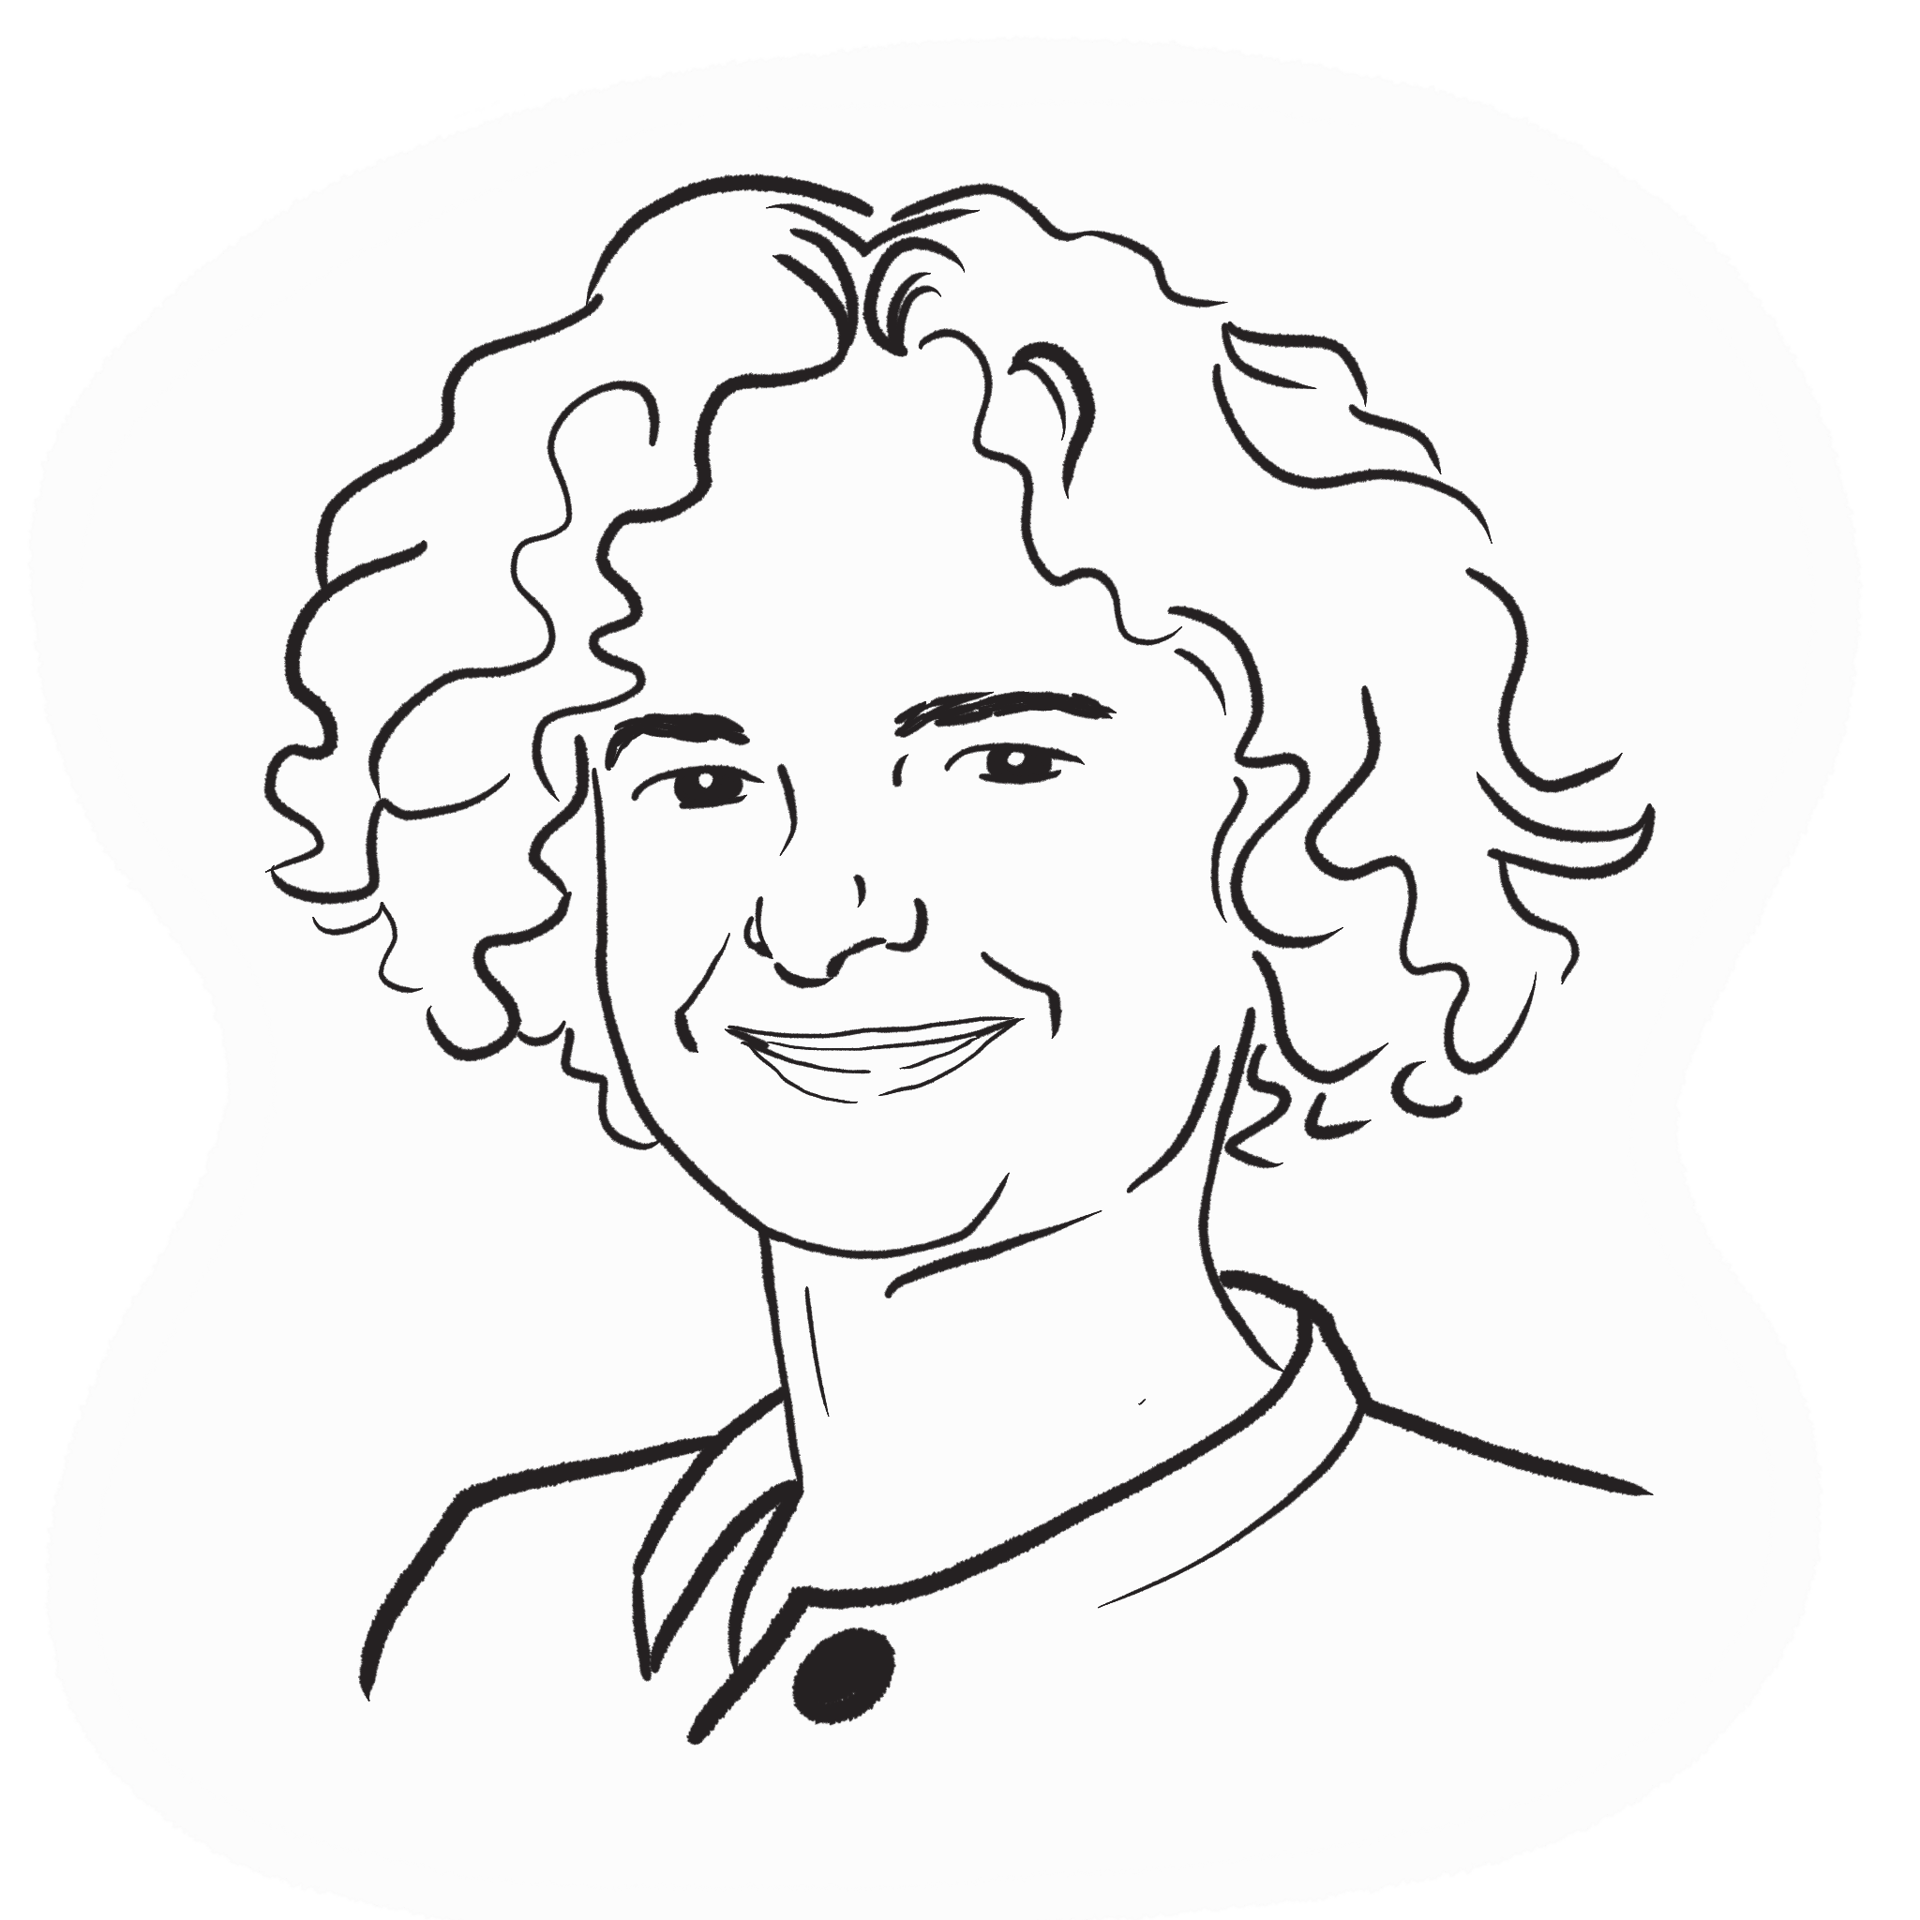 Illustration of Nora Volkow, a woman with short curly hair